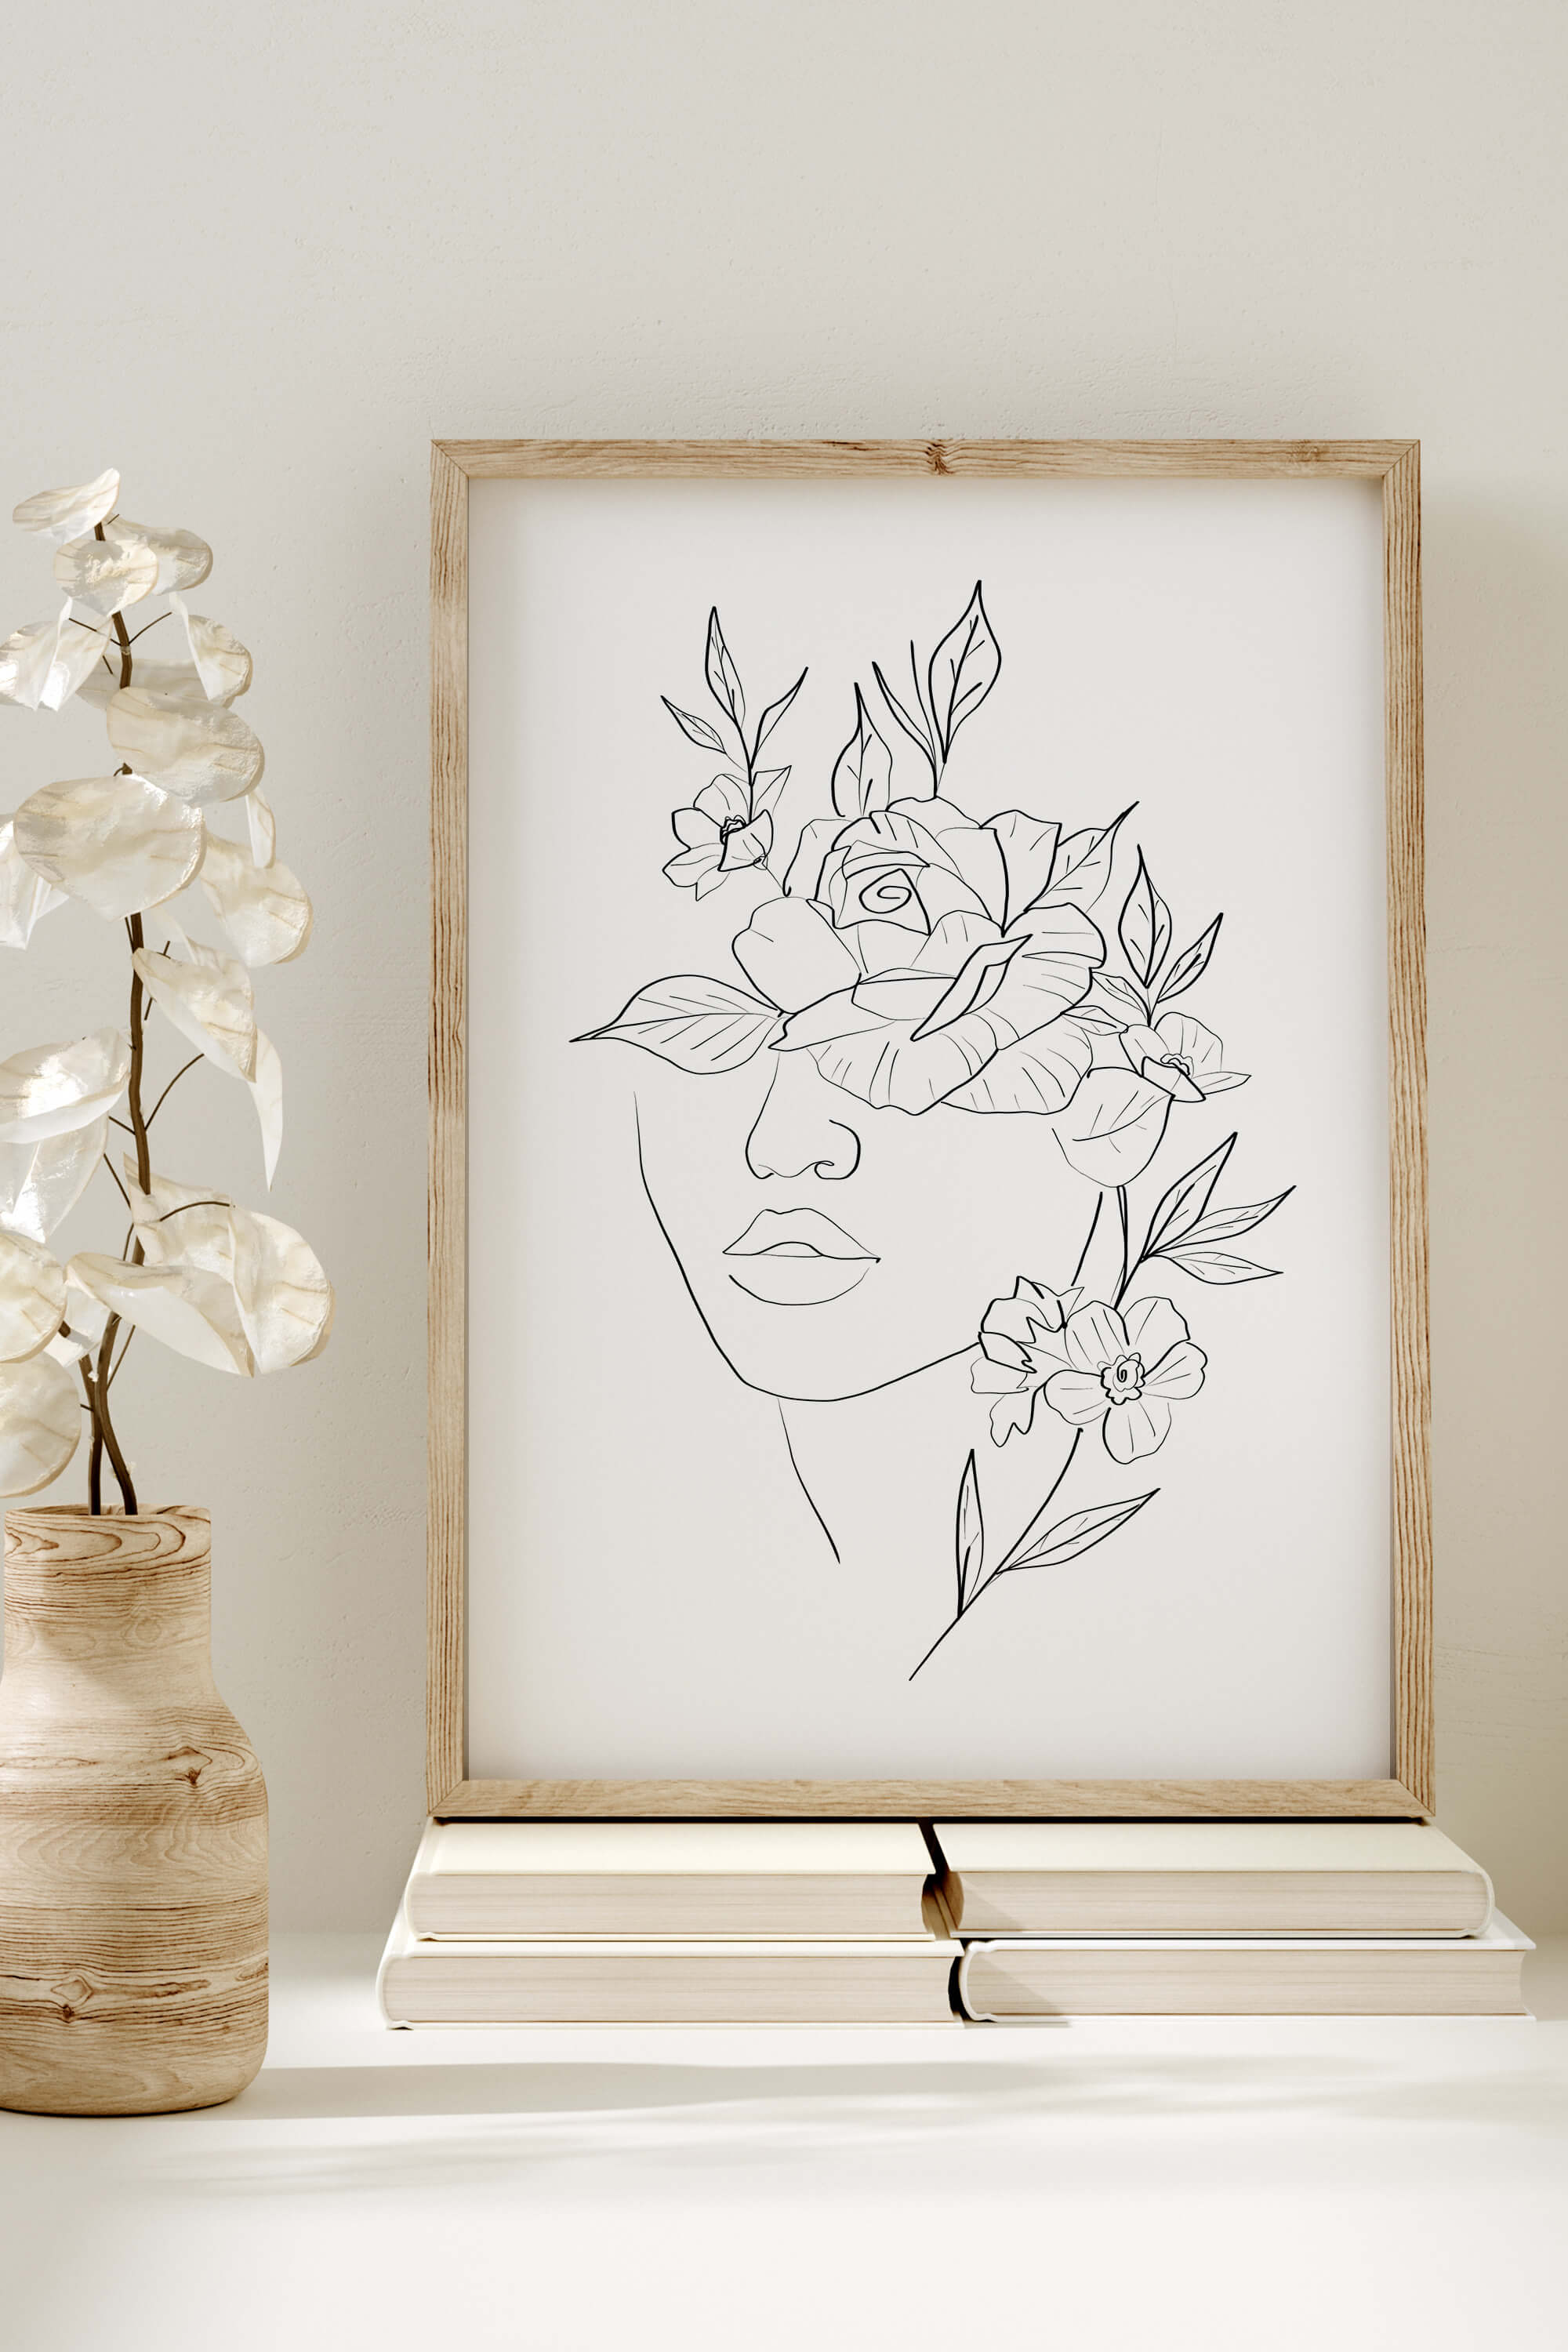 Experience the timeless allure of monochrome magic with this art print, featuring a woman's face surrounded by floral elements, creating a harmonious blend of beauty and simplicity.